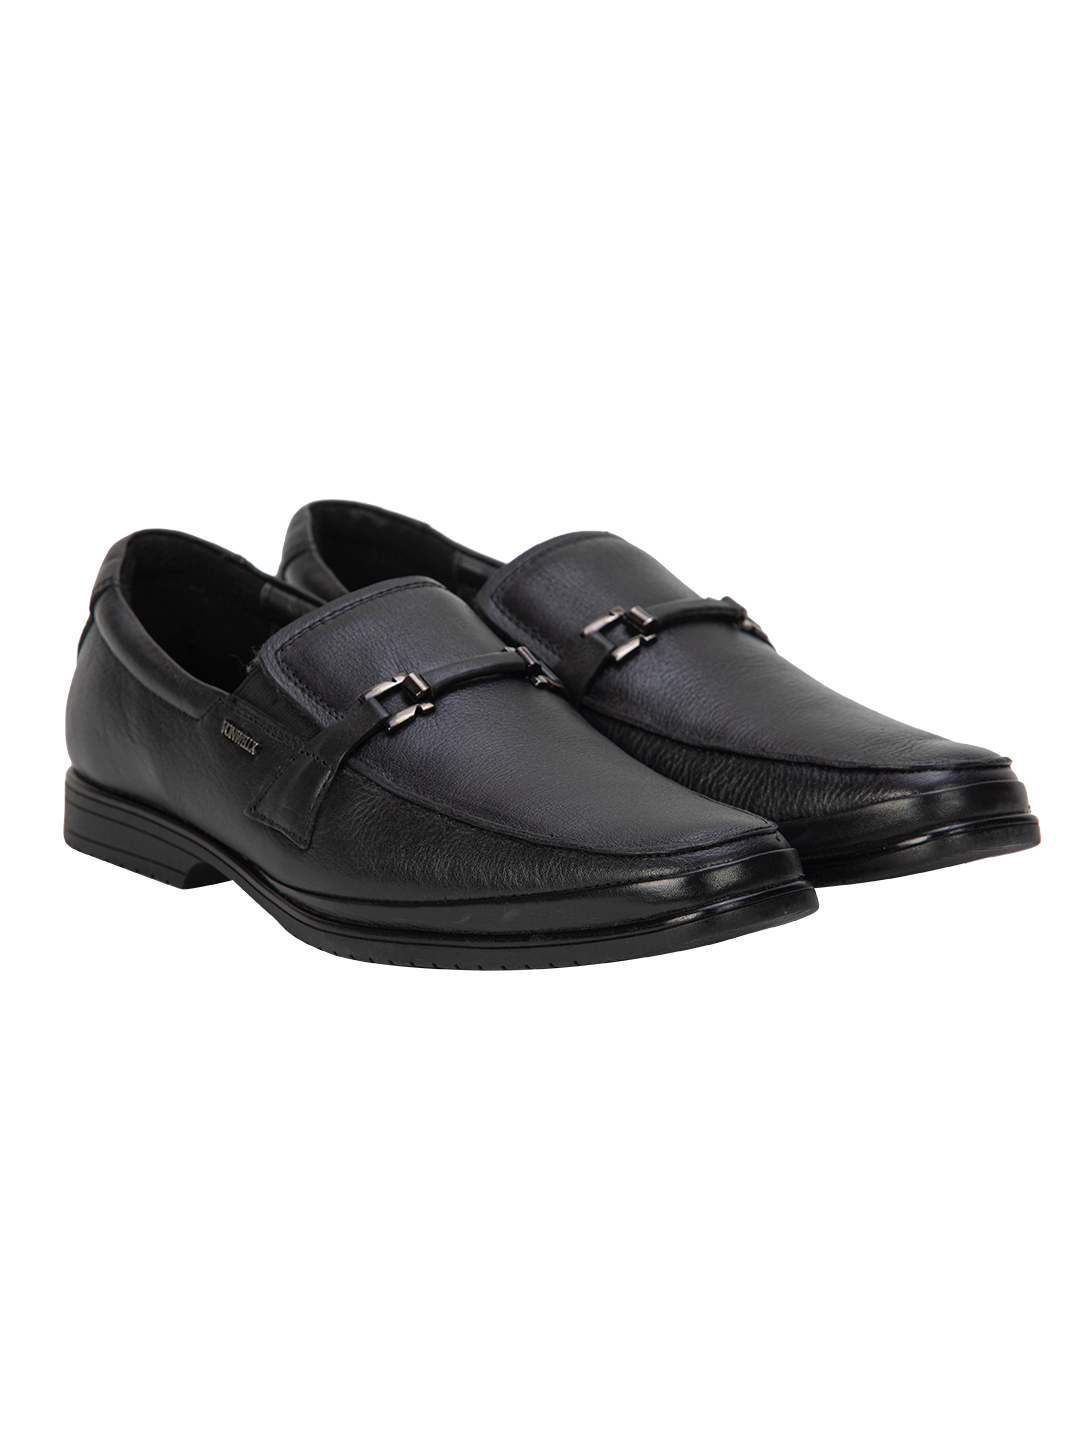 Buy Von Wellx Germany Comfort Black Jace Shoes Online in Indore